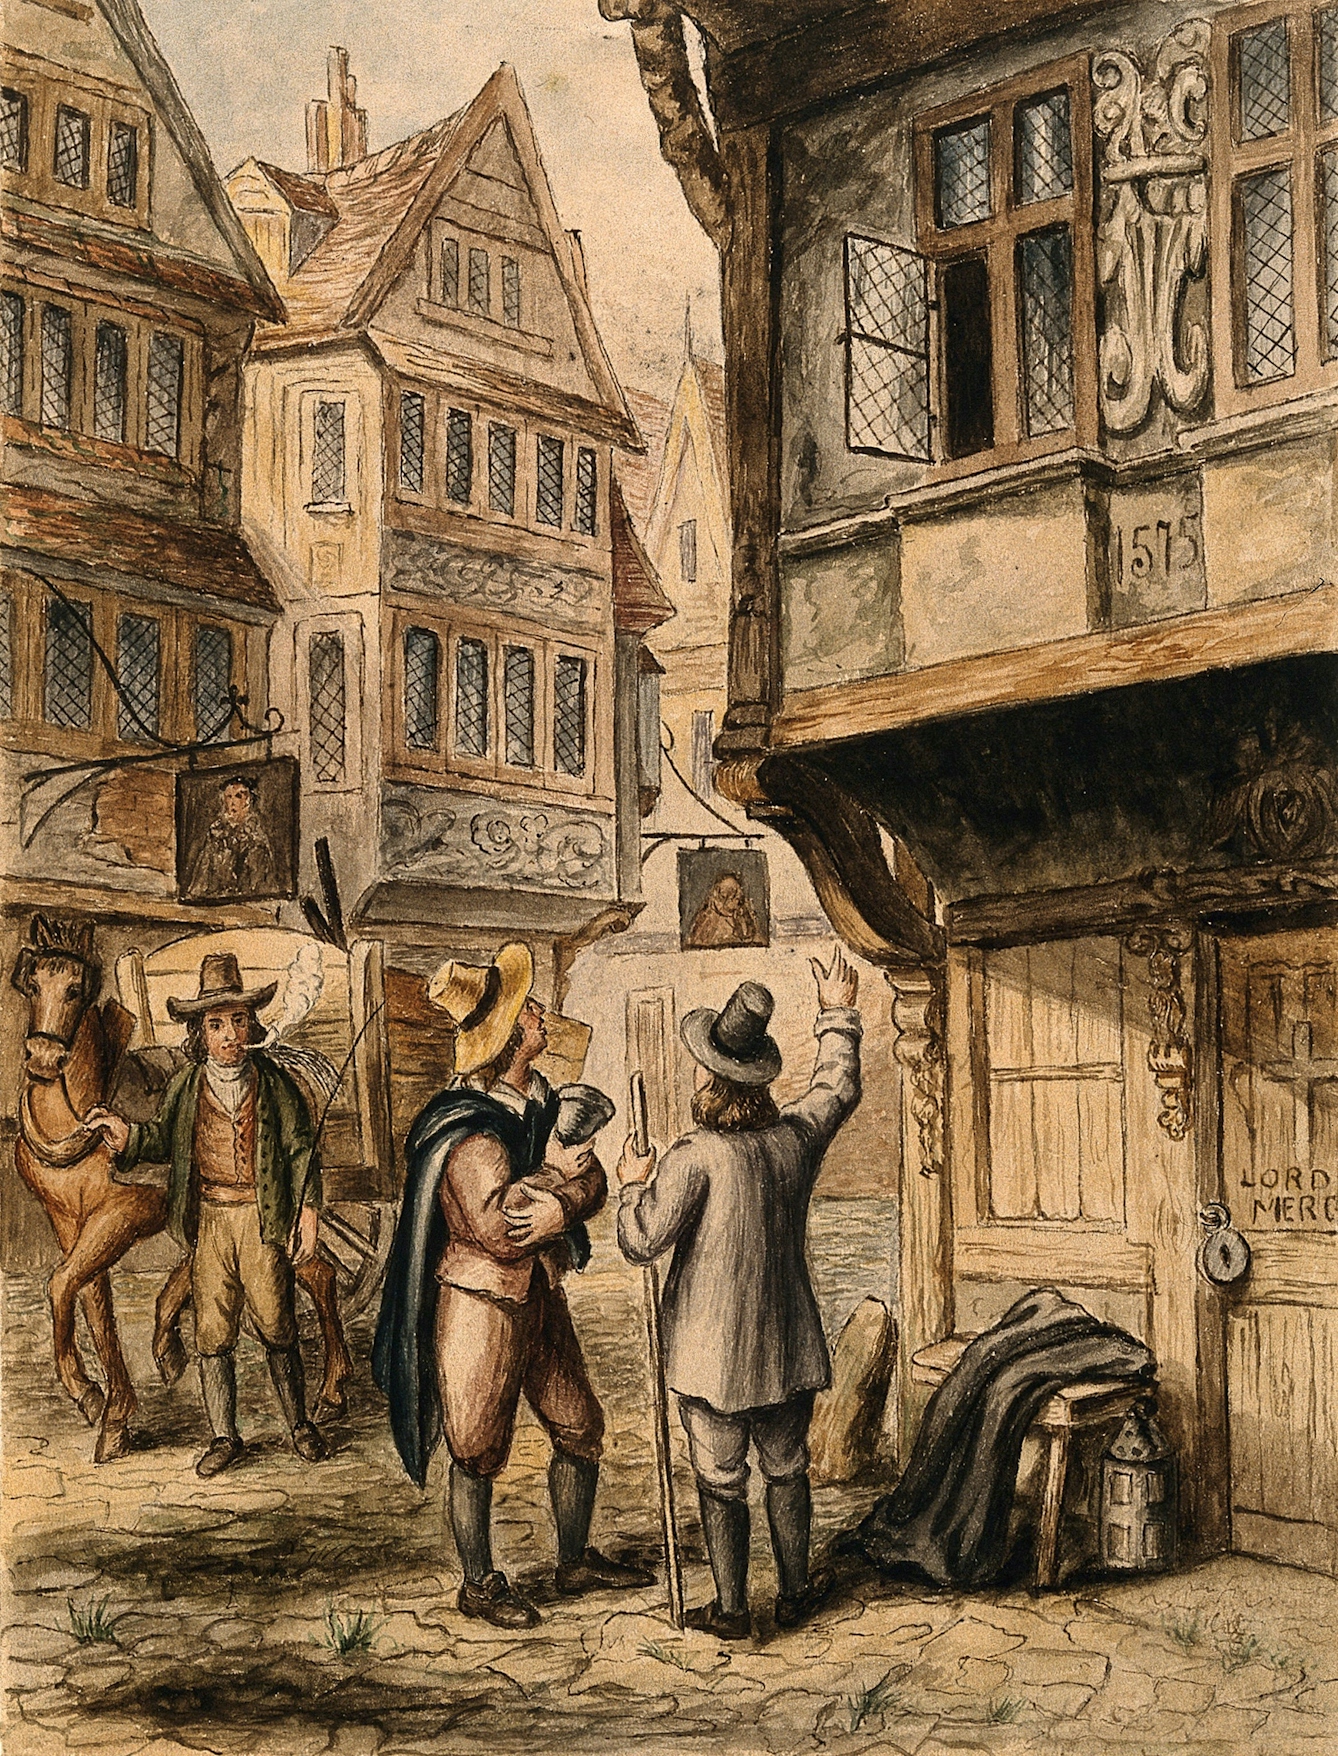 Watercolour painting showing two men gesturing up at an open window of a house that is padlocked from the outside and has a cross on the door. In the background a man exhaling a plume of smoke leads a horse and cart towards the building.